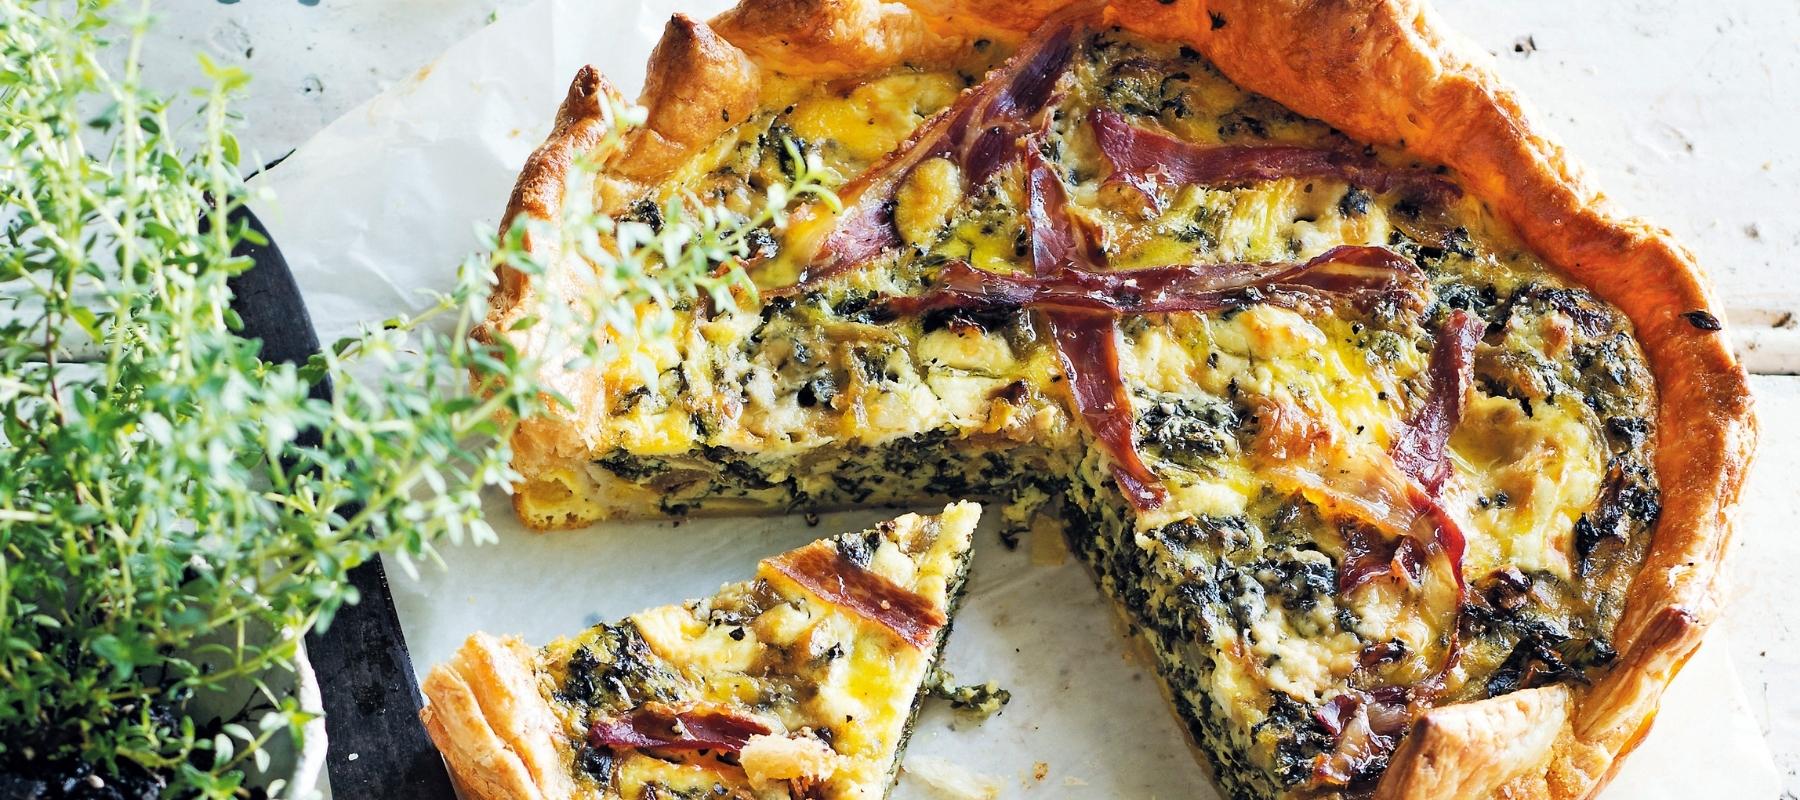 Kale and blue cheese tart